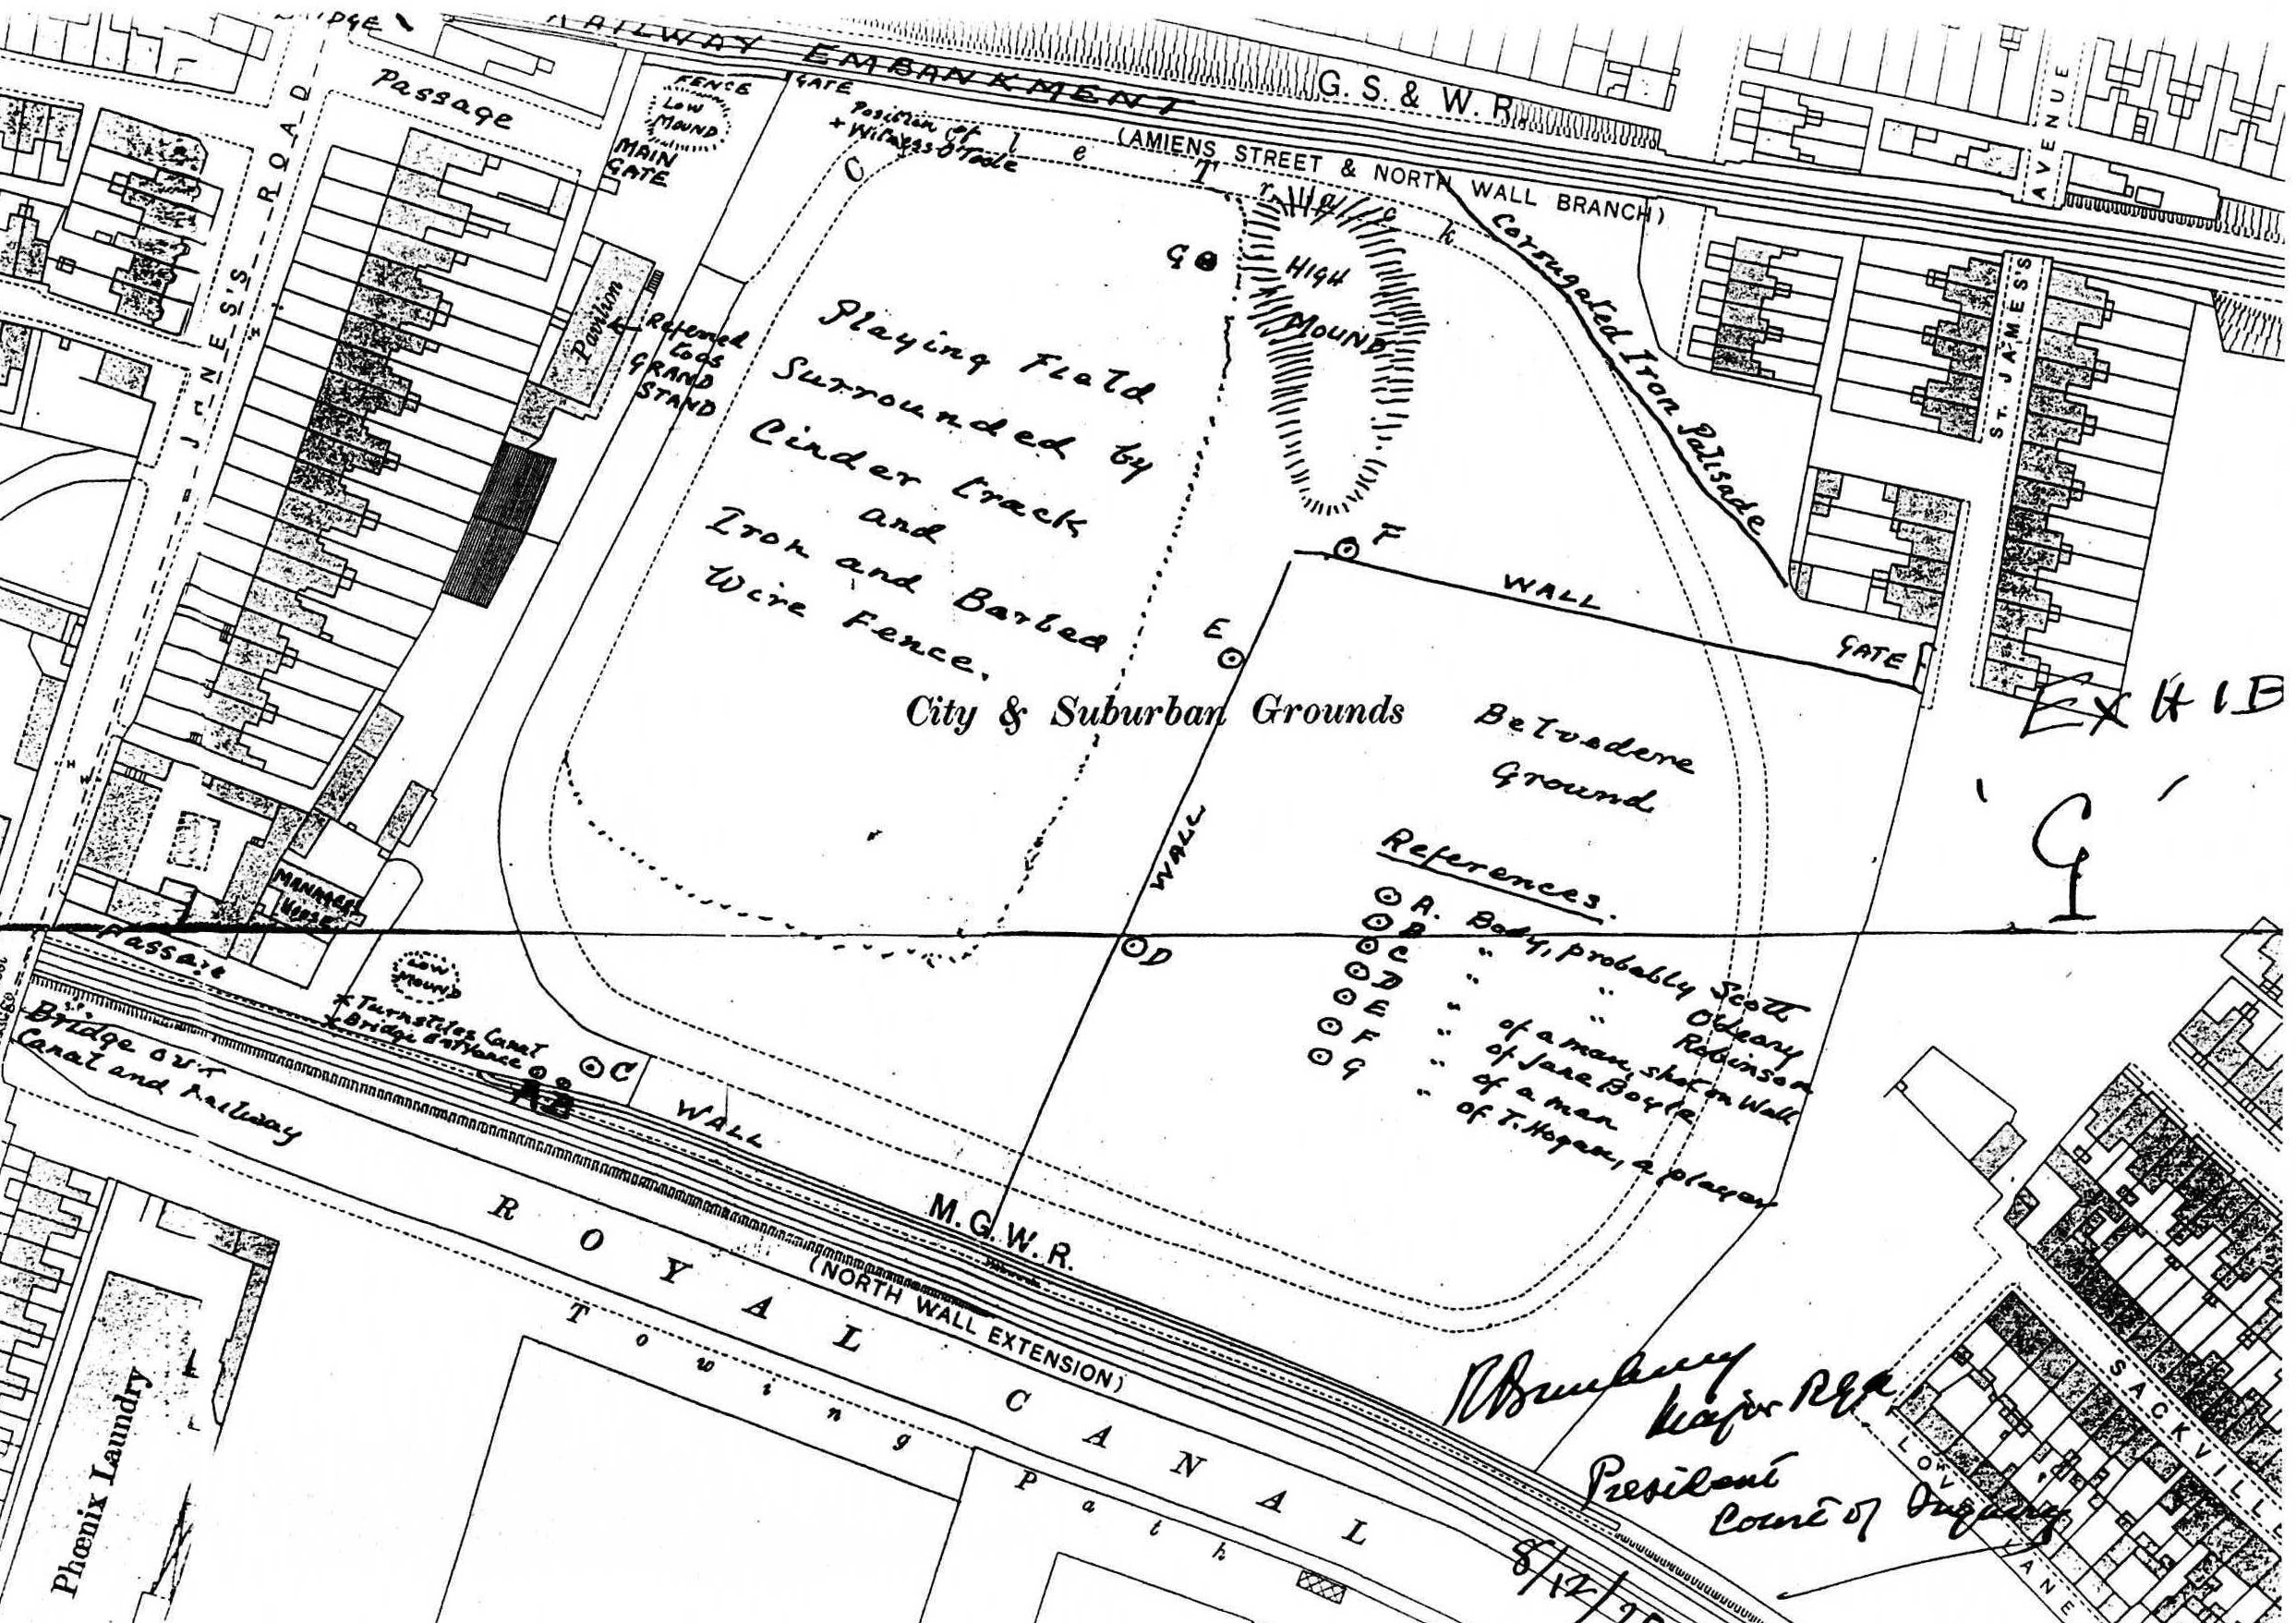 Map of Croke Park used in the Bloody Sunday Military Court of Inquiry, showing the layout of the grounds and the locations where people were shot.